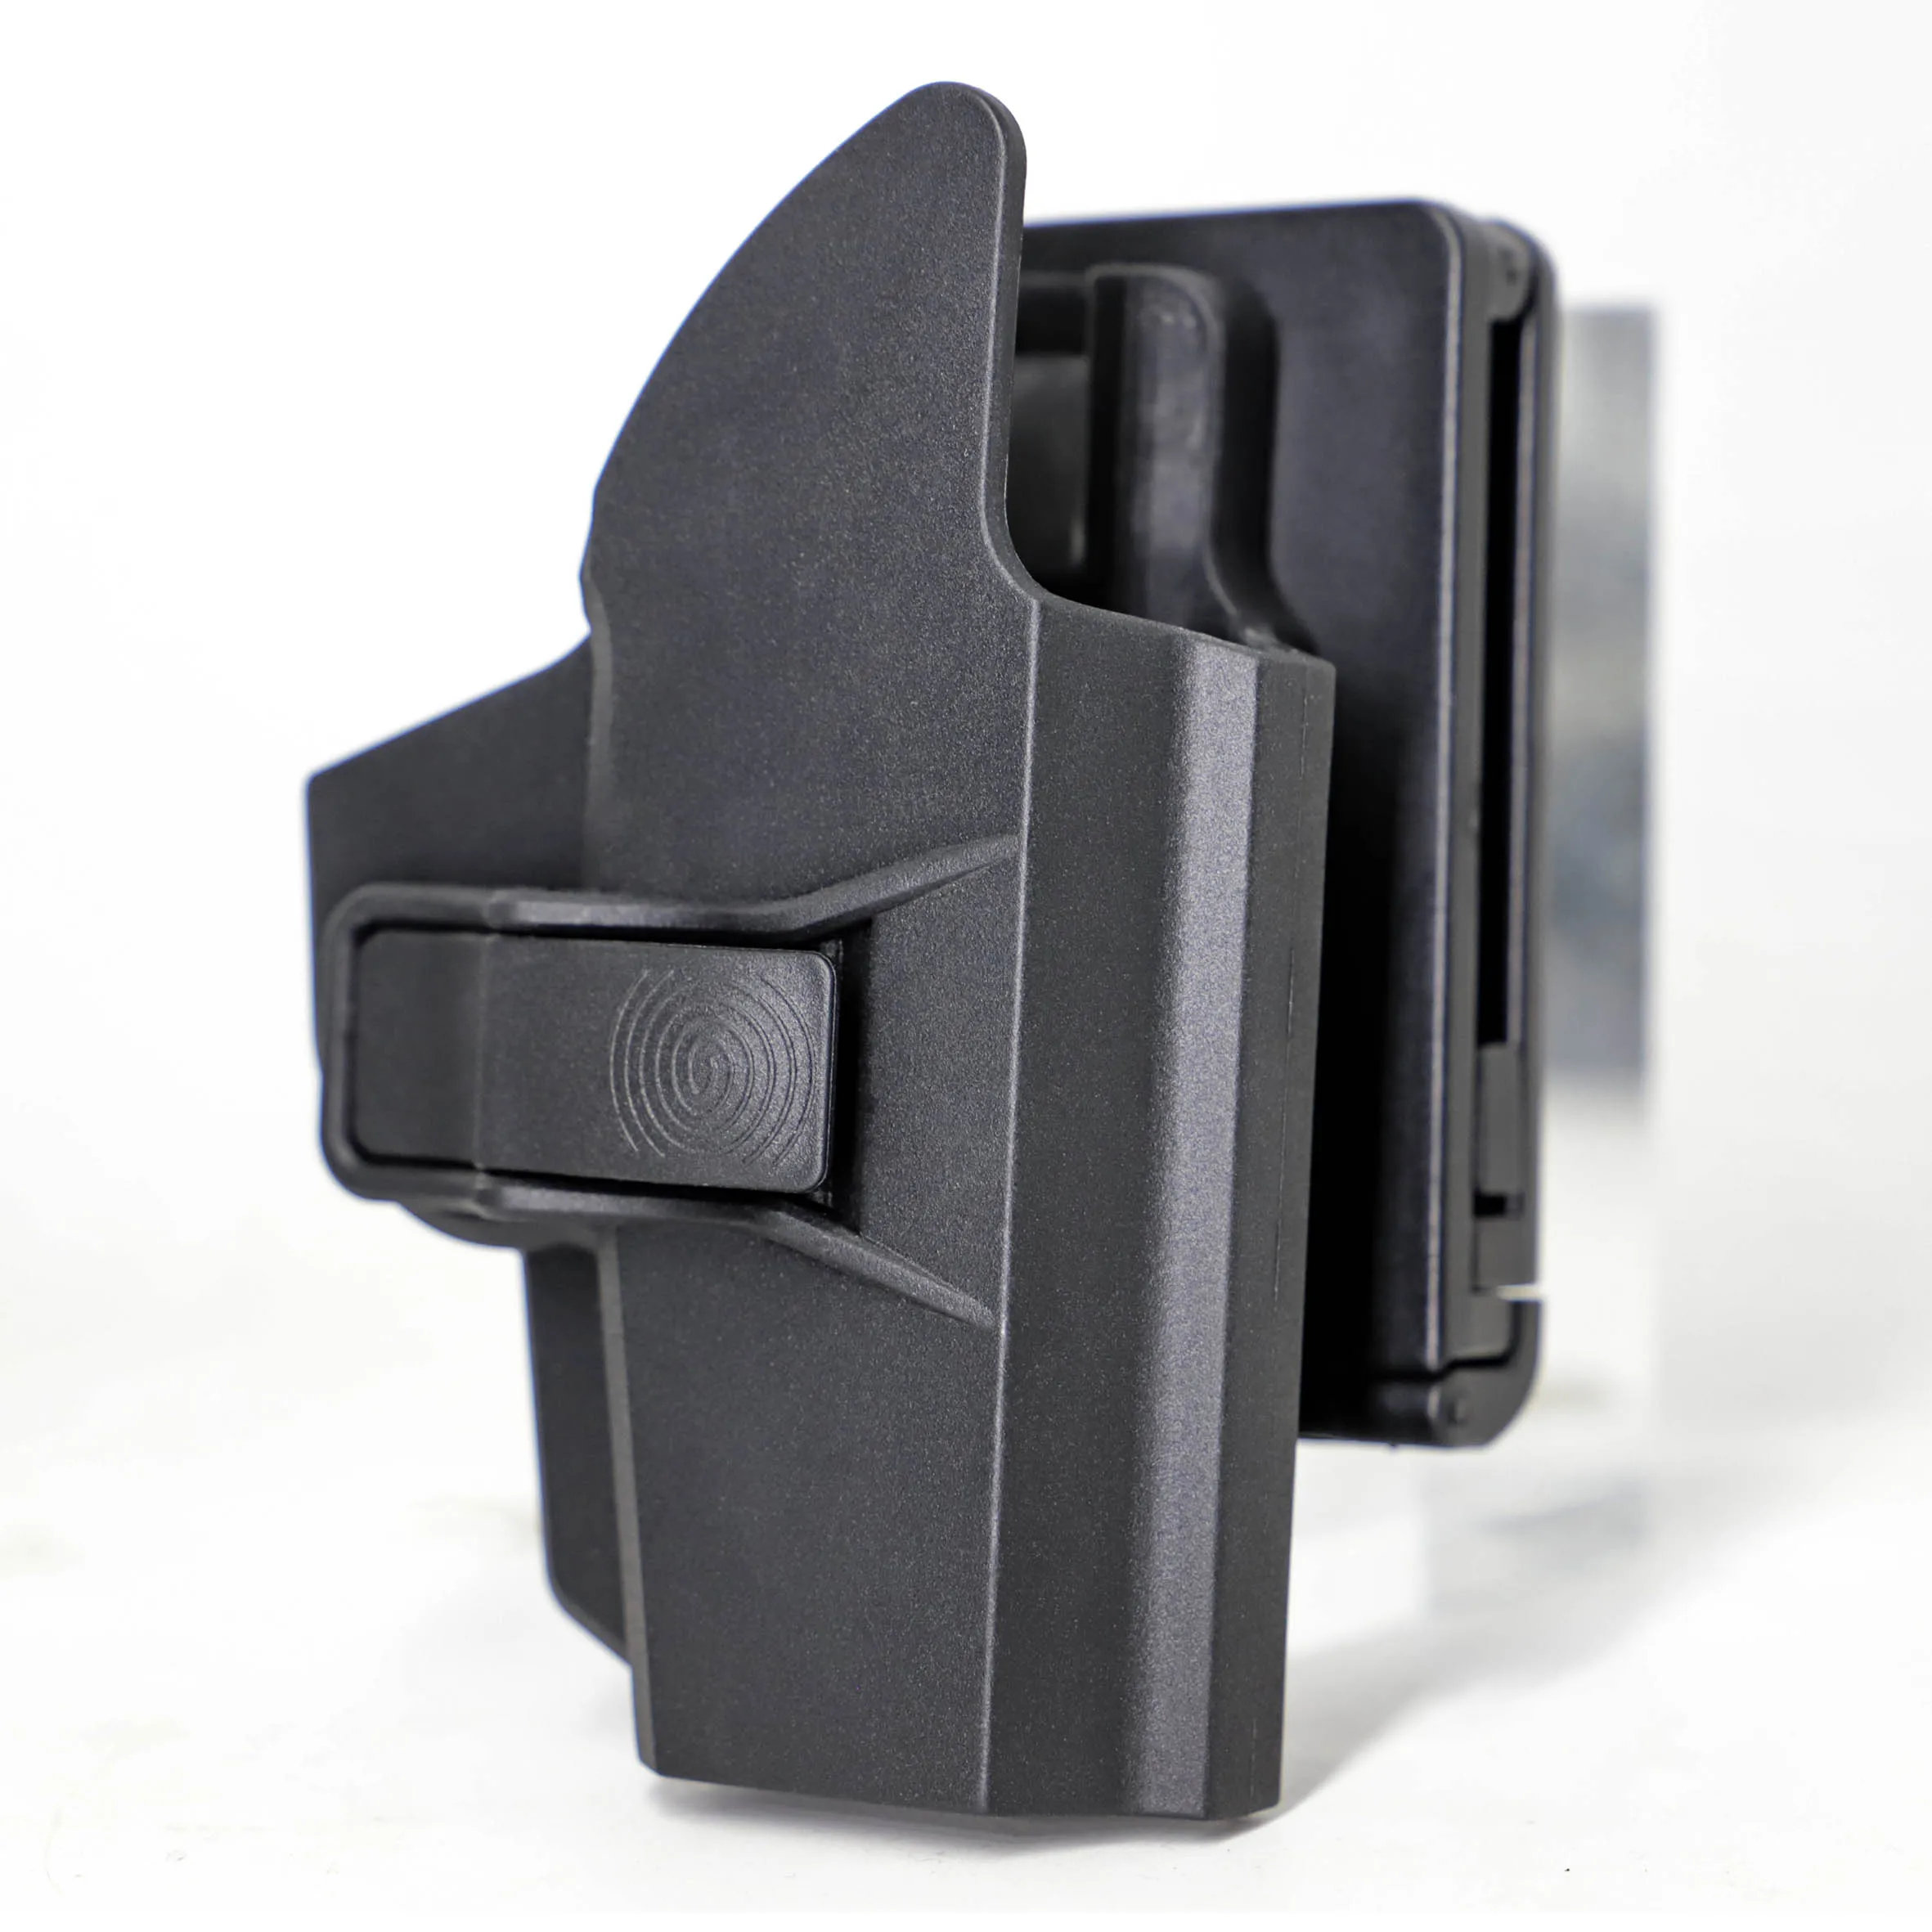 

TEGE 2021 Newly Designed Hot Sale Tactical Gun Holster Fit For Sccy Cpx-1/cpx-2 9mm Belt Clip Gun Holster